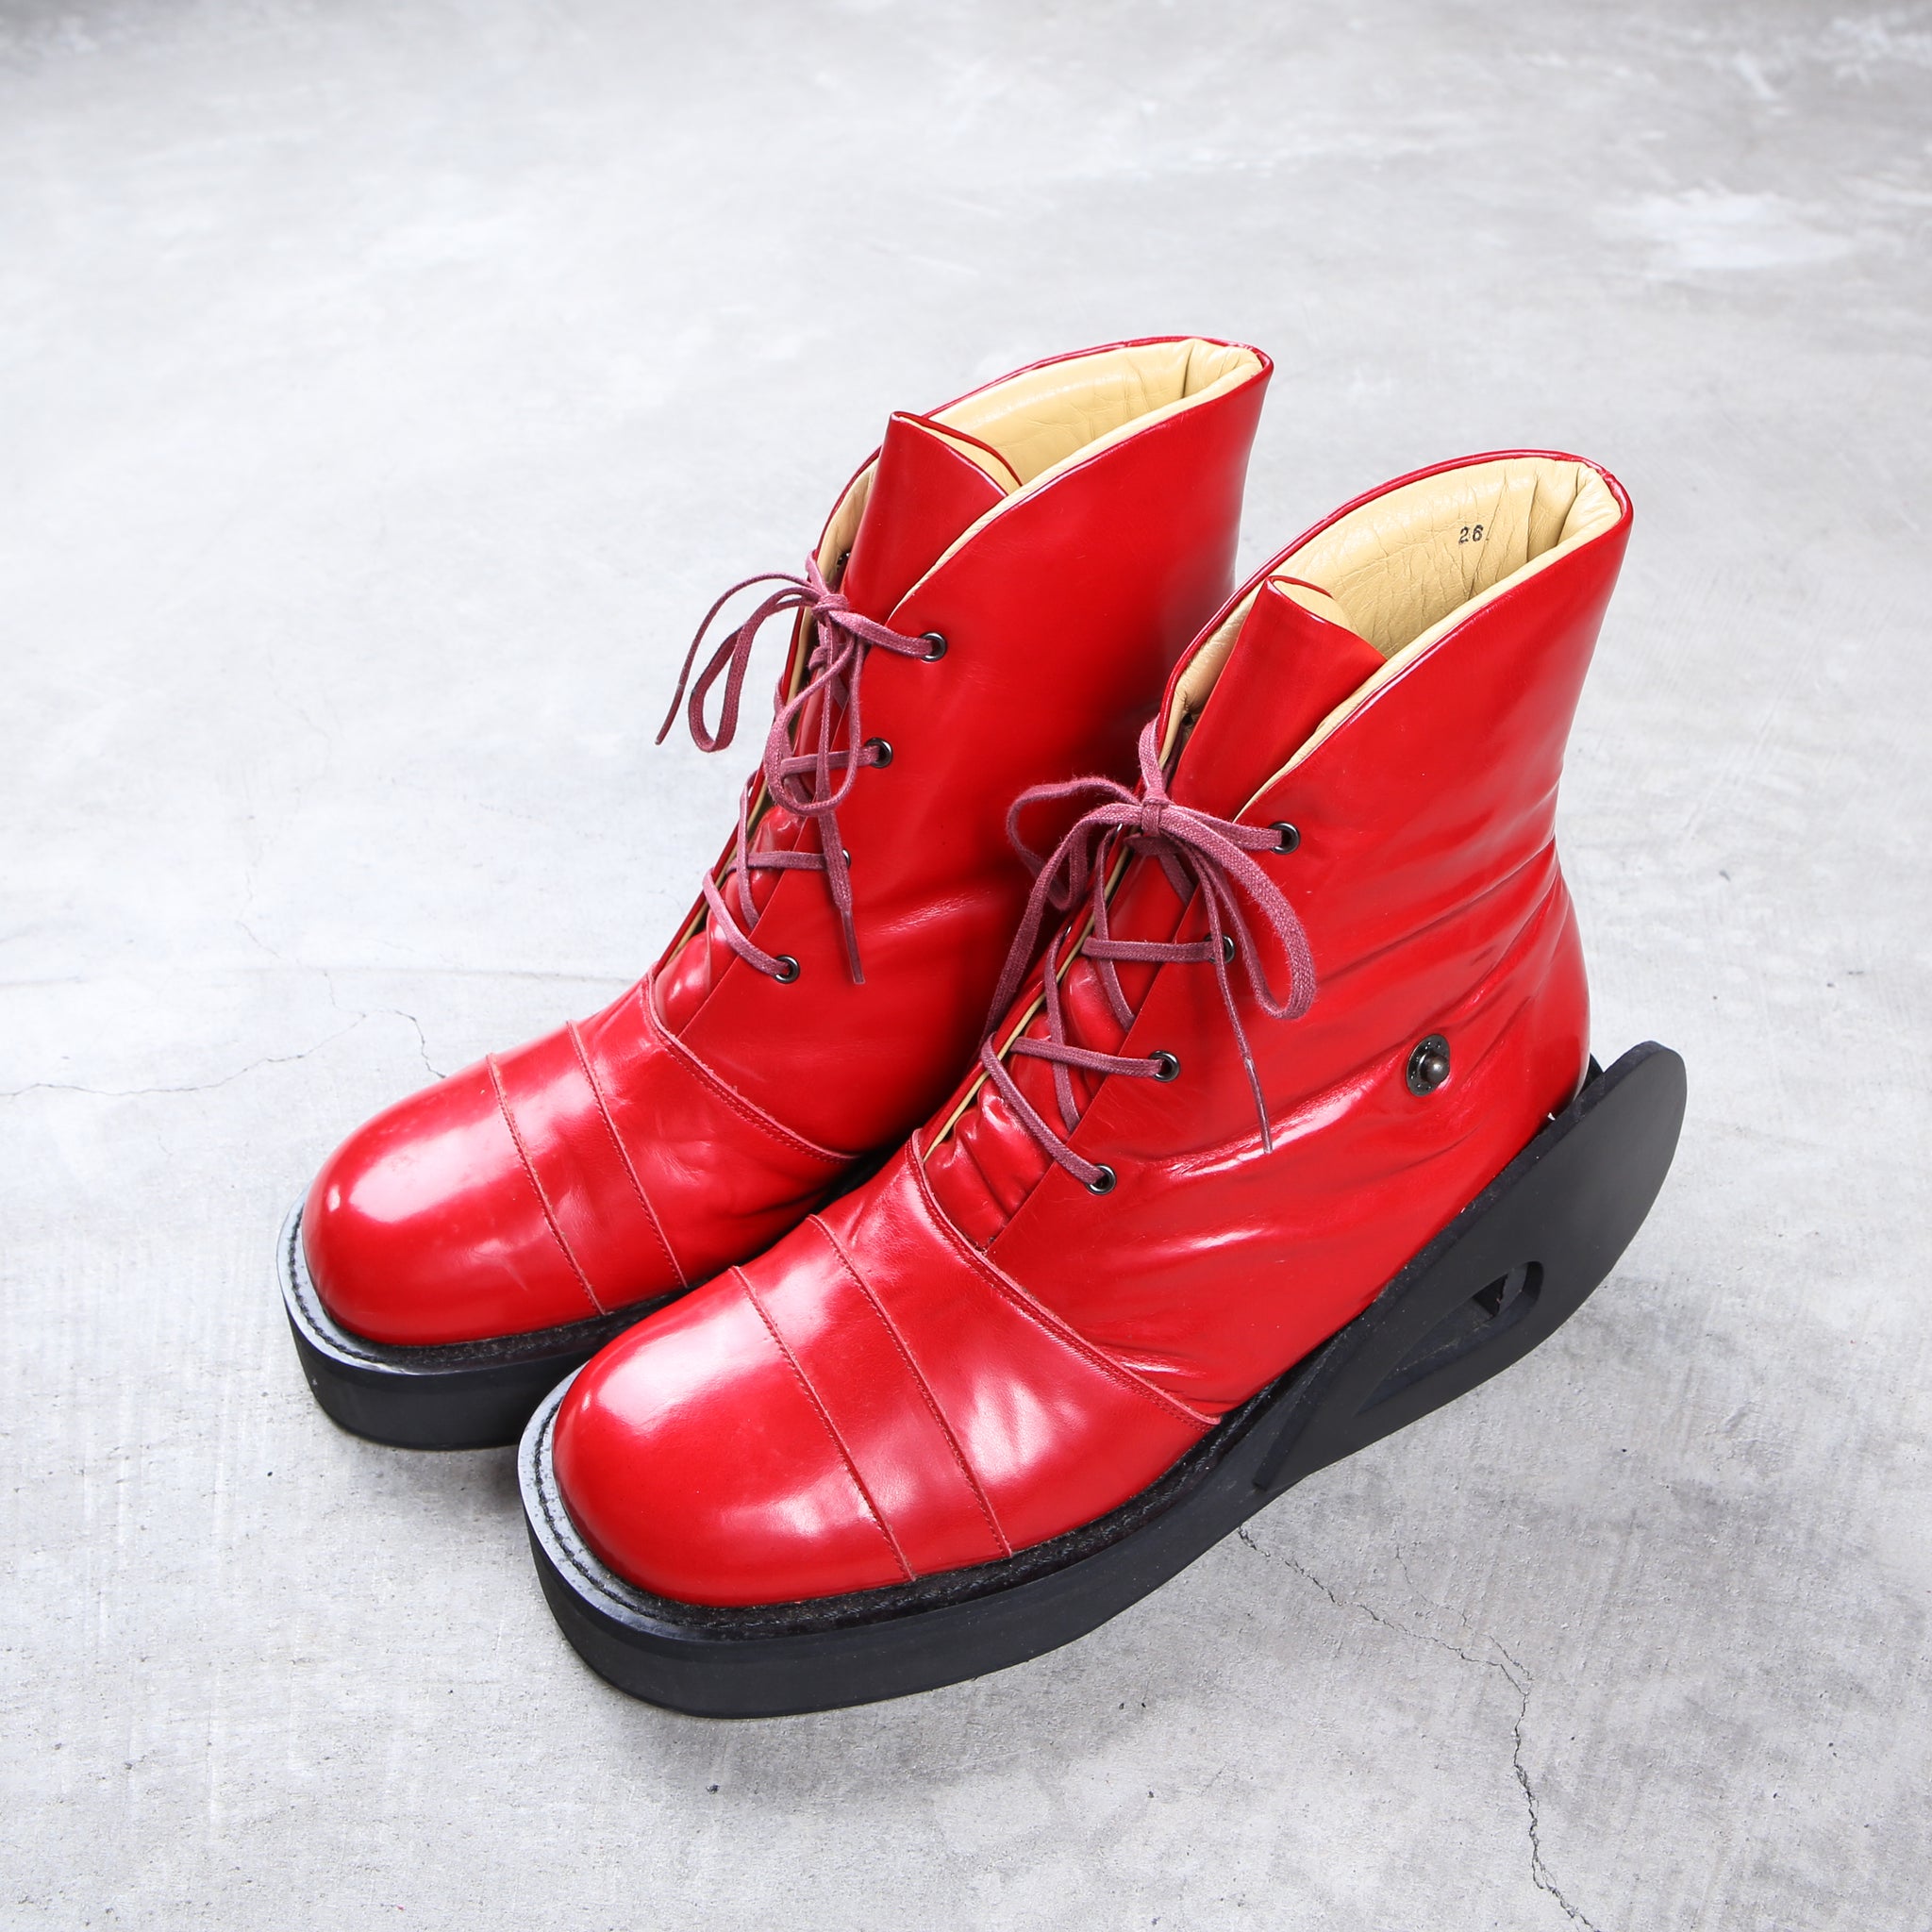 20471120 Red Ski Boots AW/96